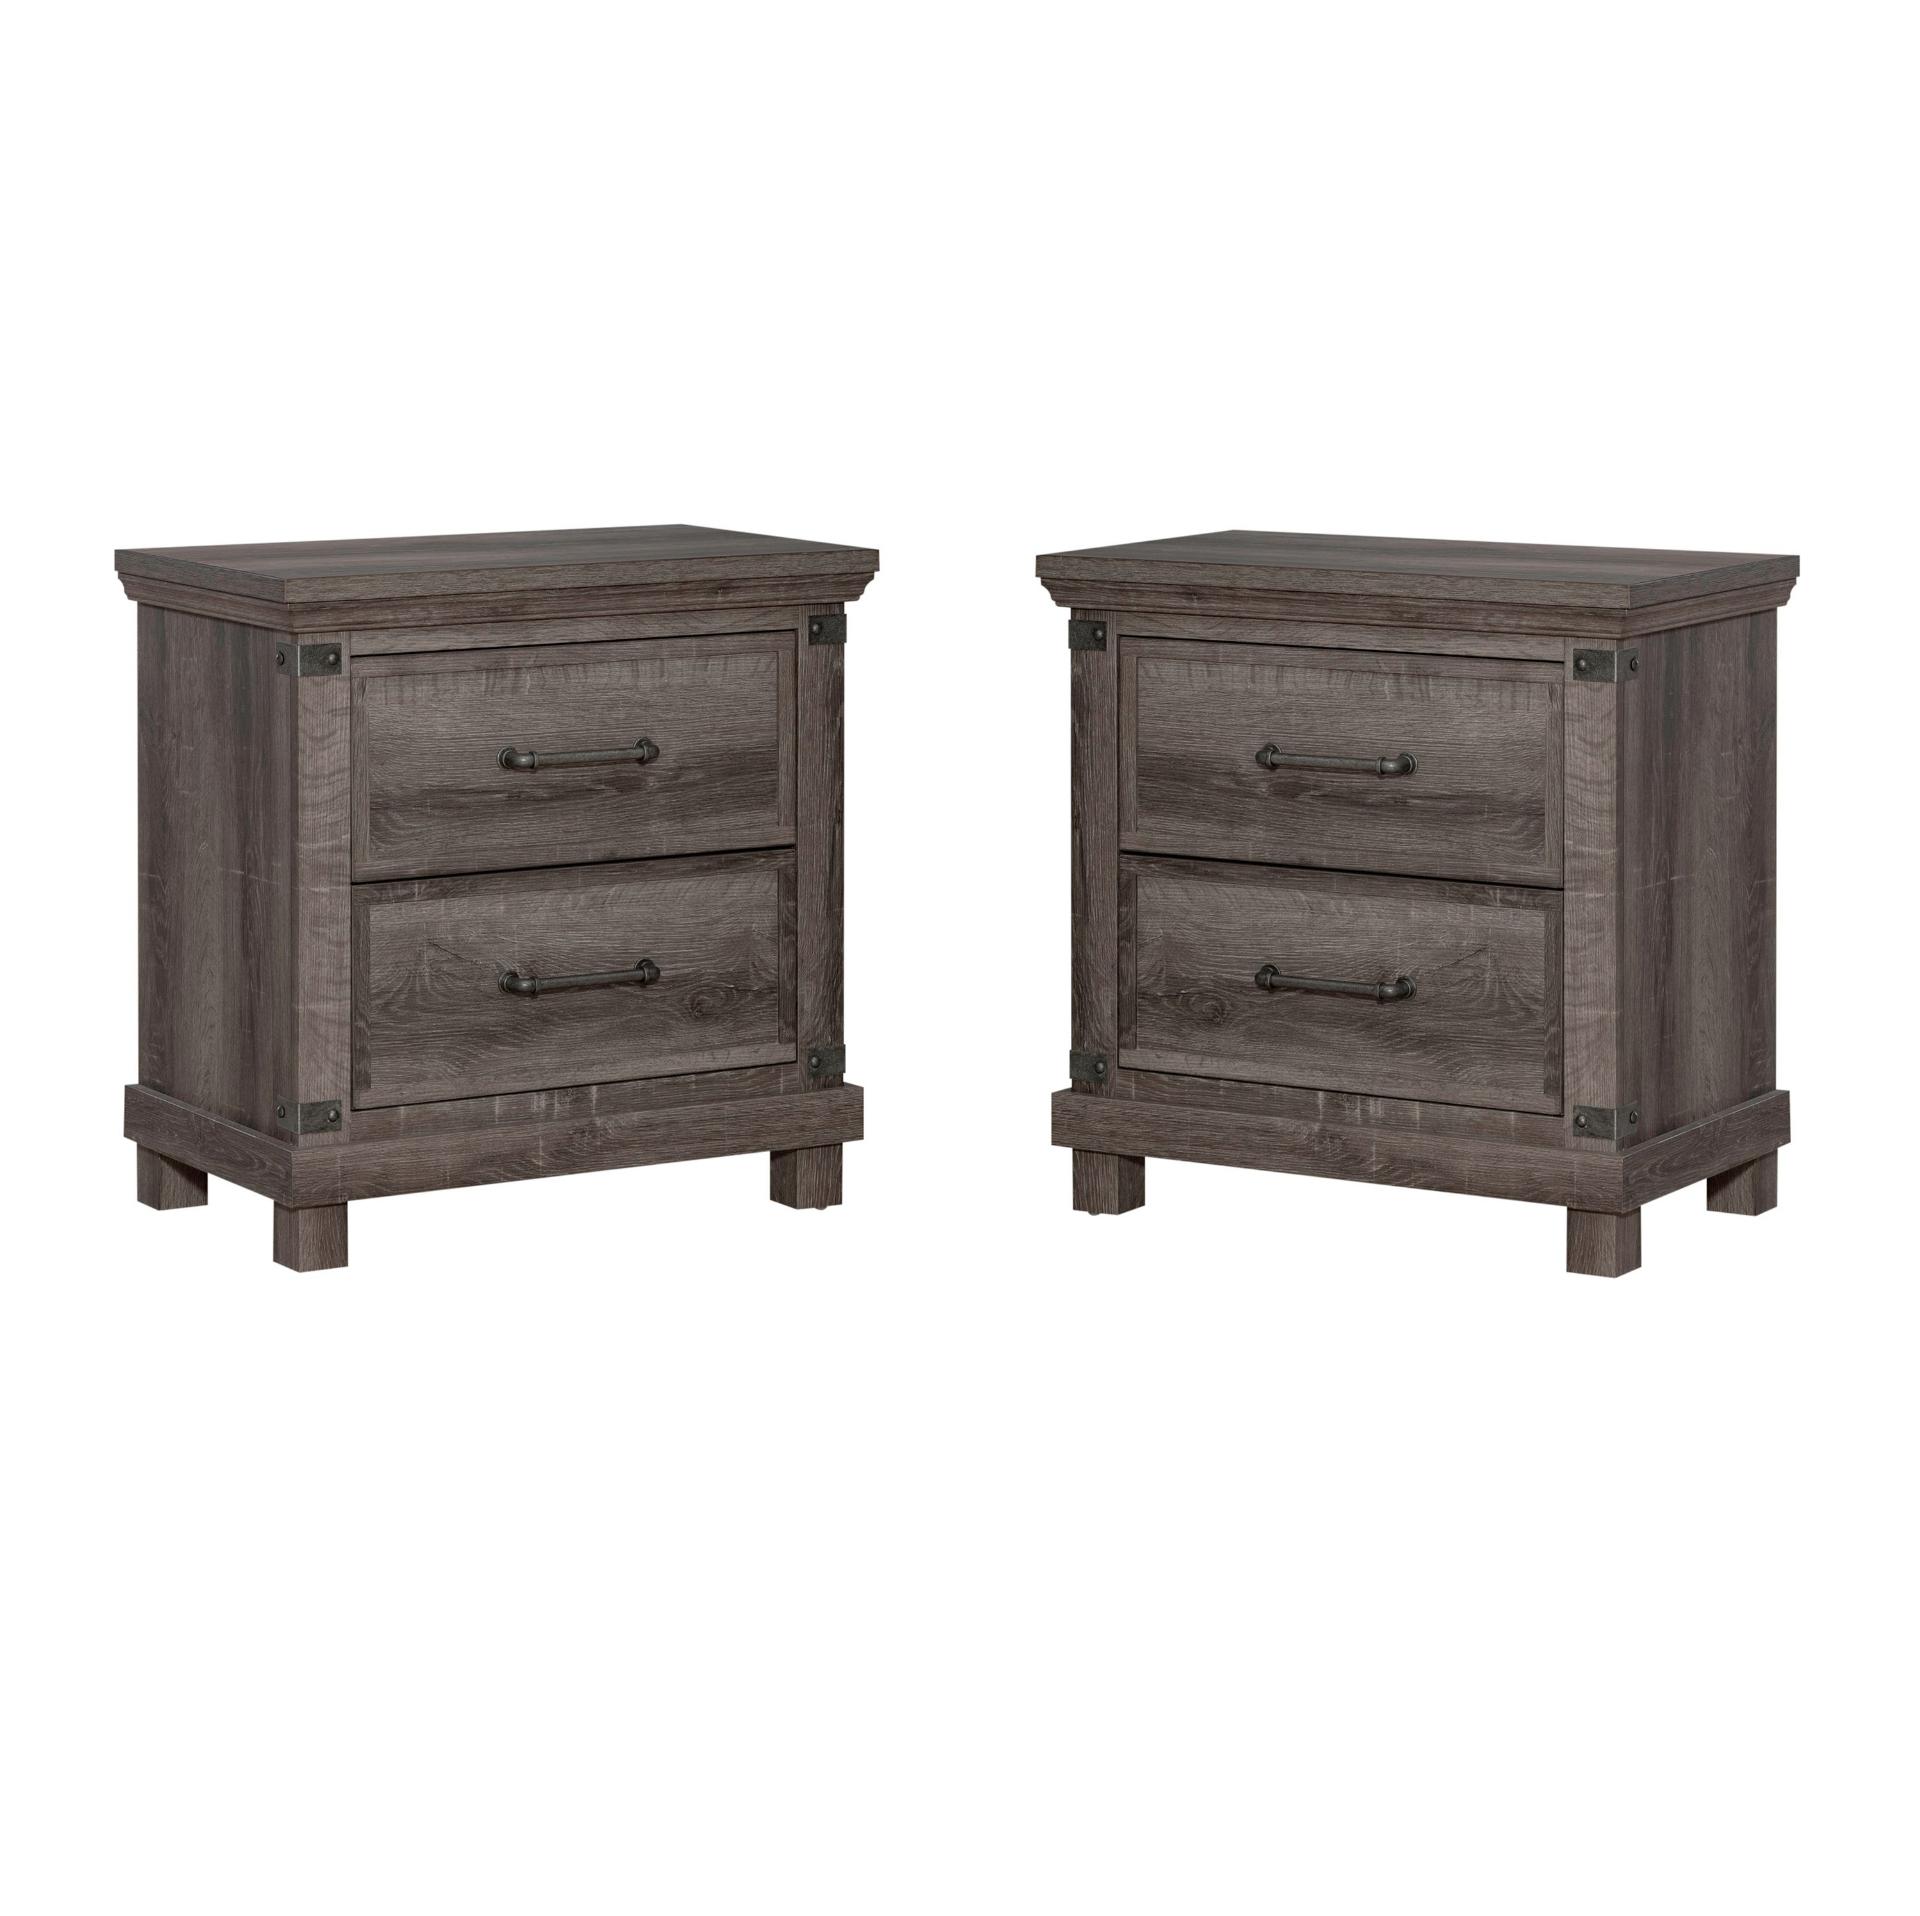 Rustic Nightstand Set Lakeside Haven (903-BR) 903-BR61-2PC in Brown 